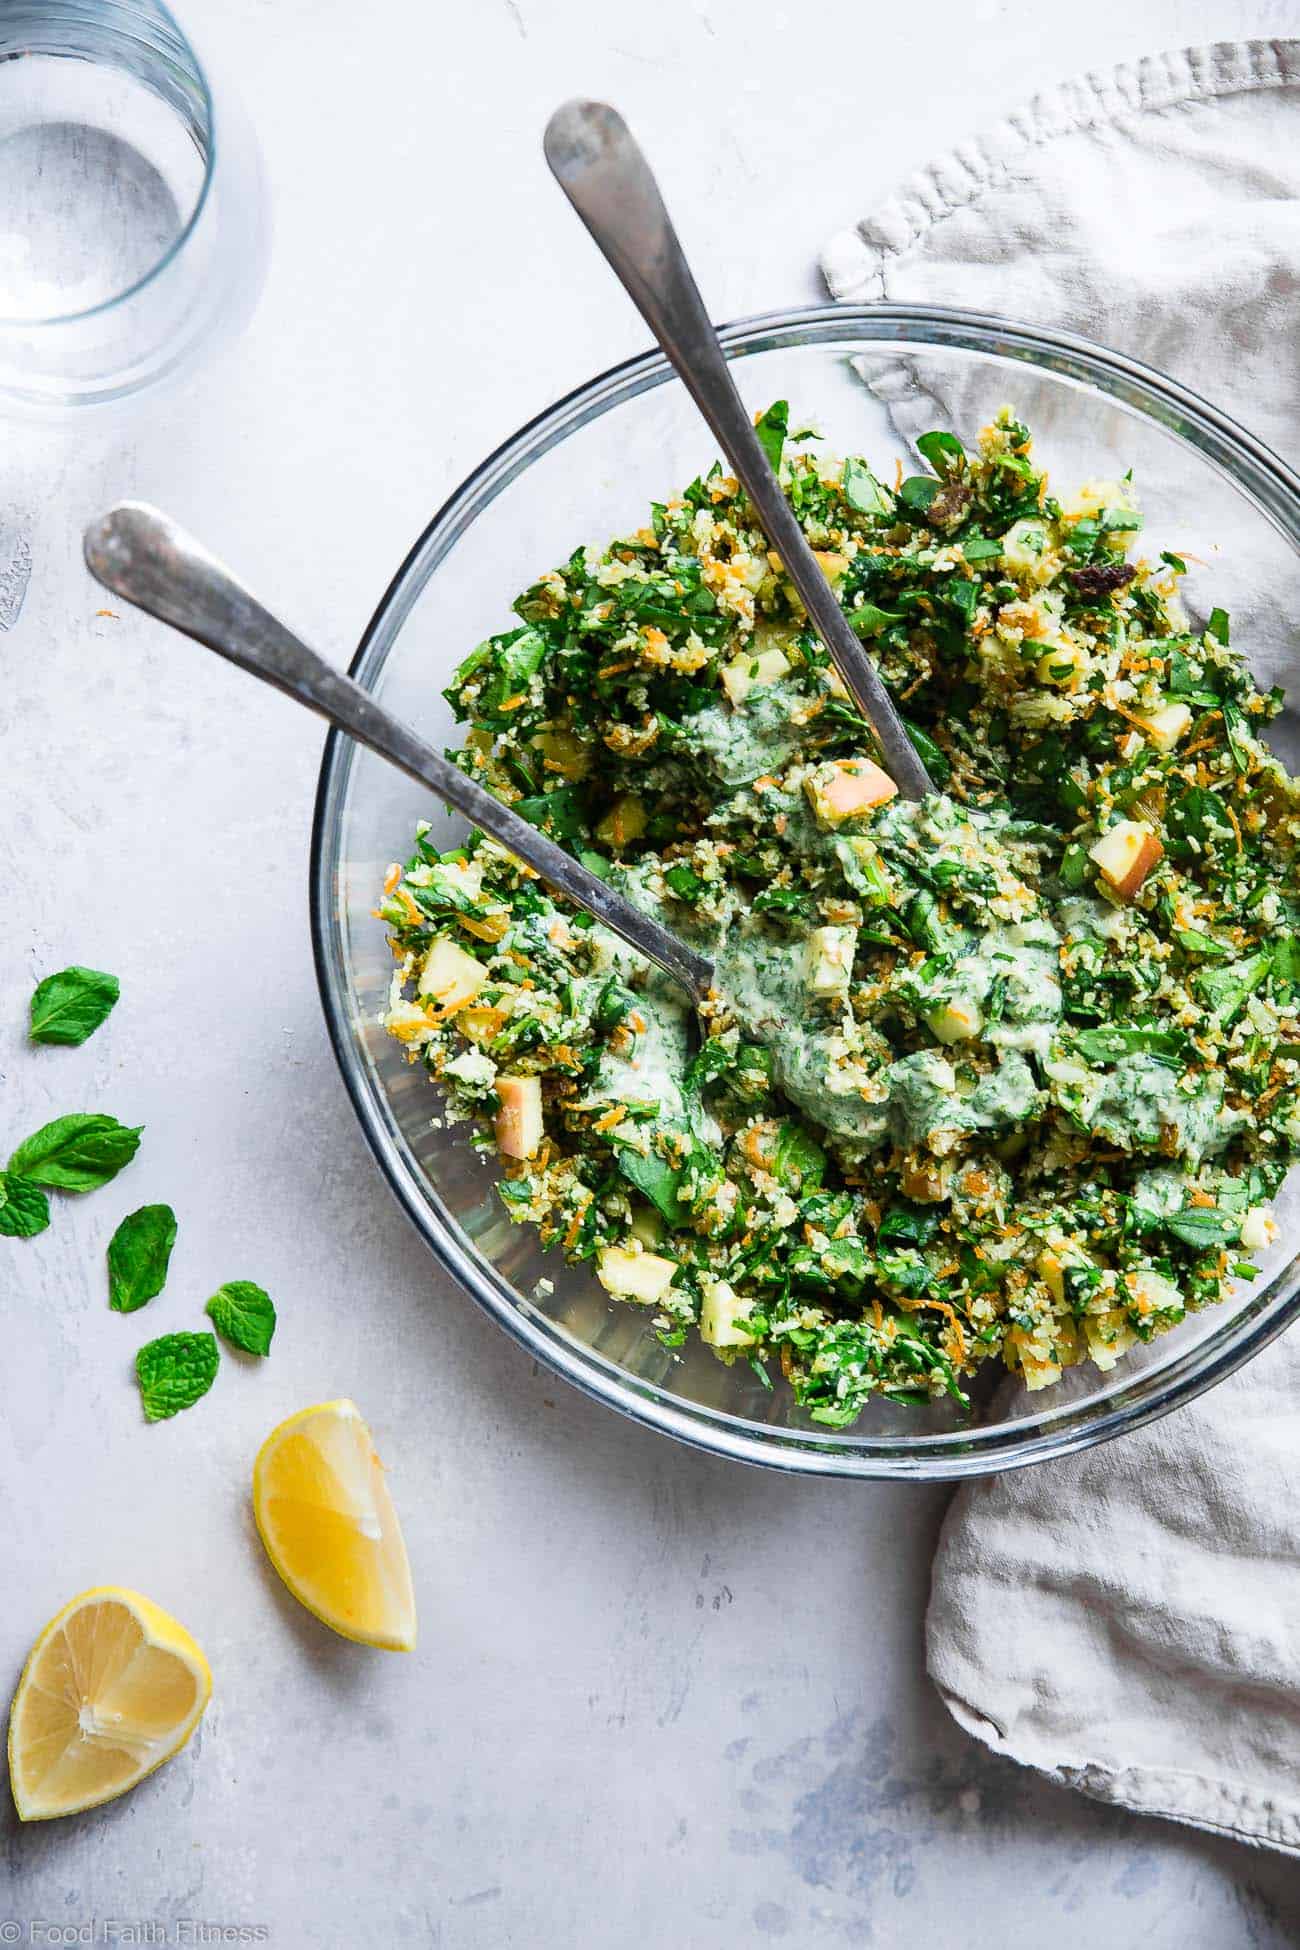 Moroccan Grated Raw Cauliflower Detox Salad - This veggie packed salad is a gluten/grain/dairy/sugar free salad with sweet and spicy, bold flavor! Paleo, vegan and whole30 compliant and perfect for meal prep! | Foodfaithfitness.com | @FoodfaithFit